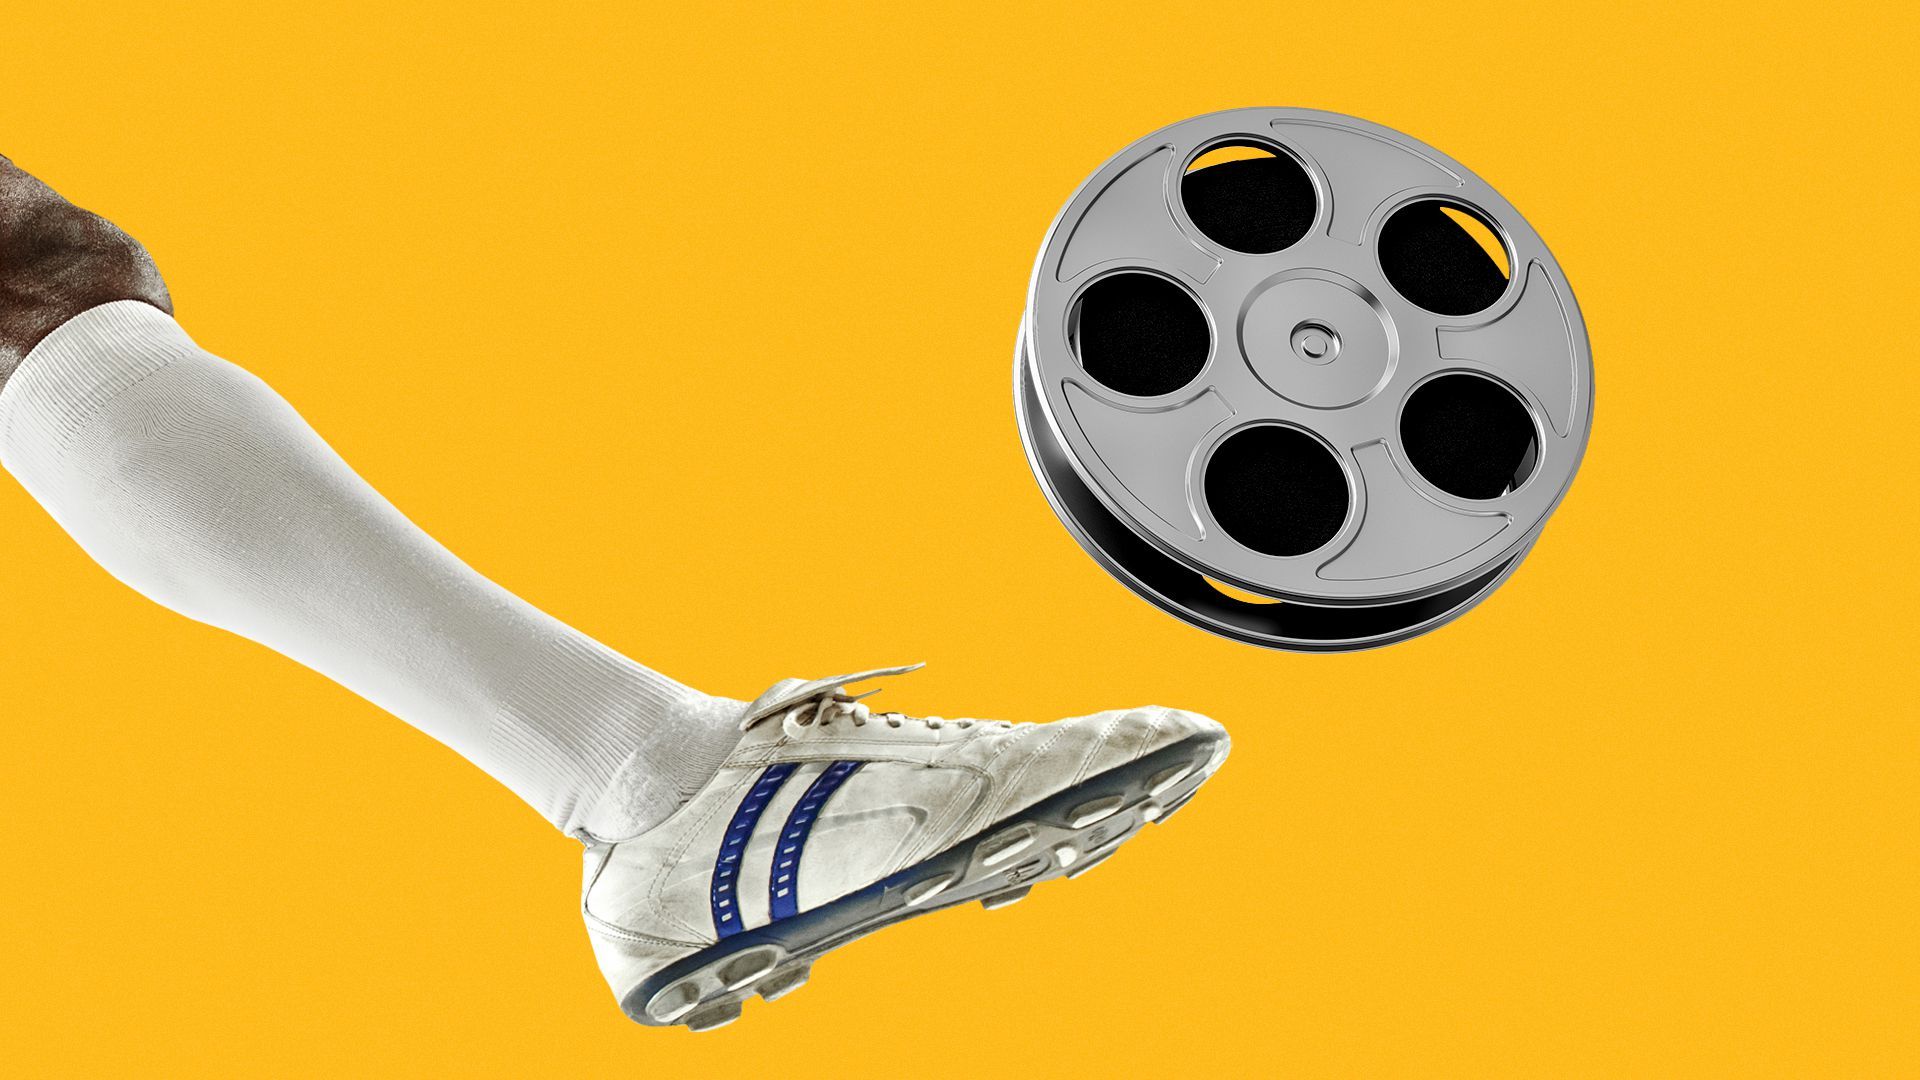 Illustration of a soccer cleat kicking a film reel